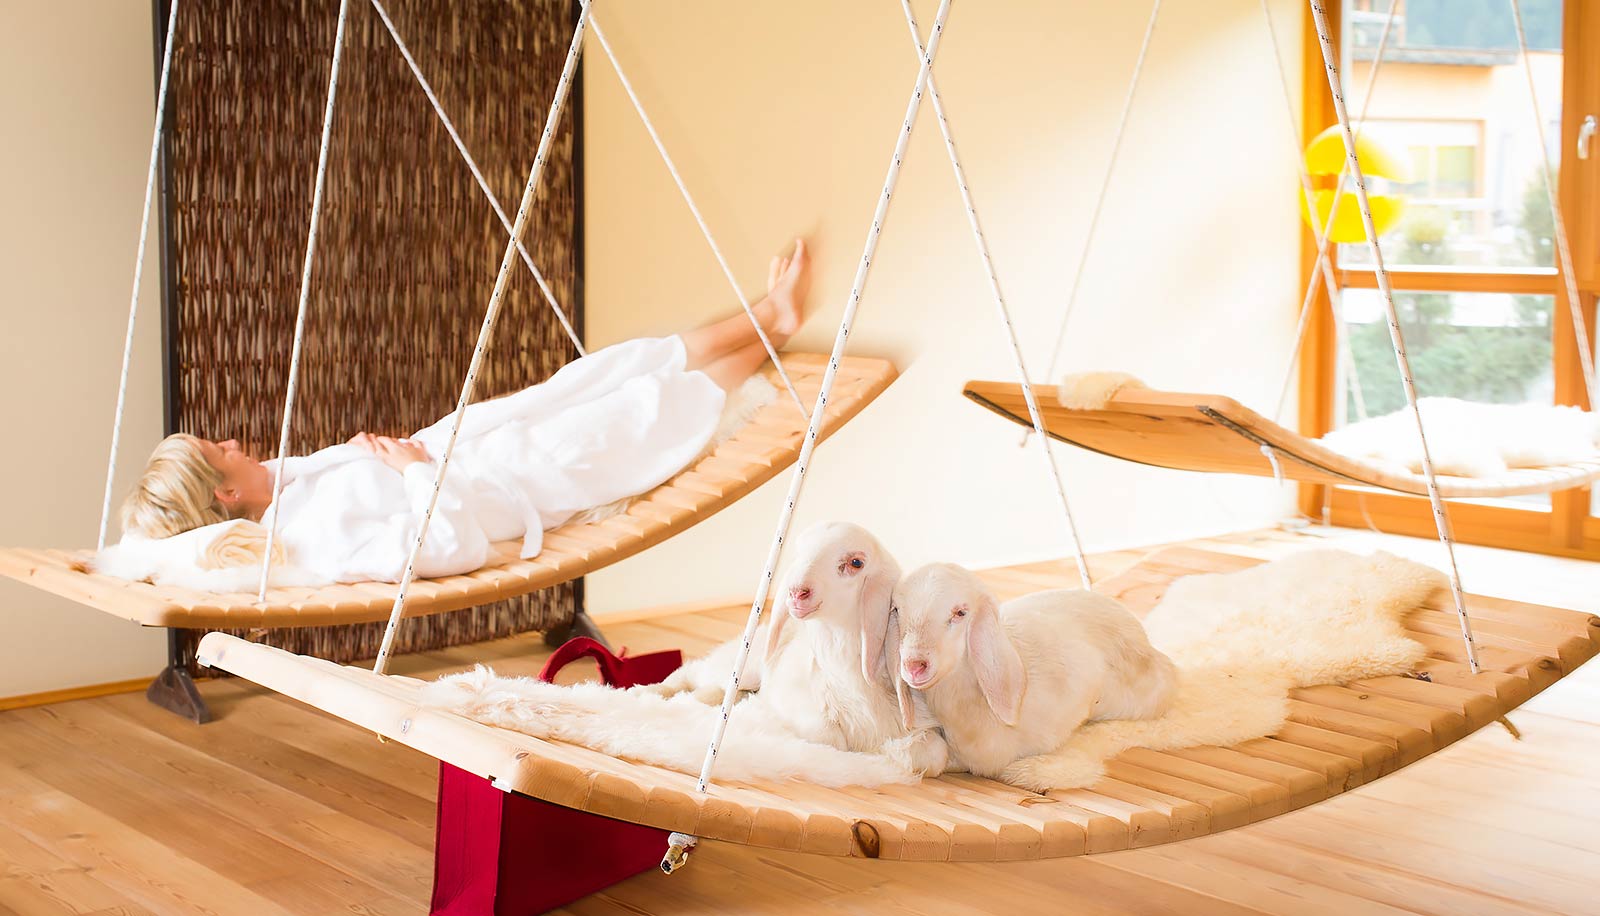 Suspended wooden lounge beds at Arosea Life Balance Hotel in Ultental-Val d'Ultimo in which a woman and two lambs are resting